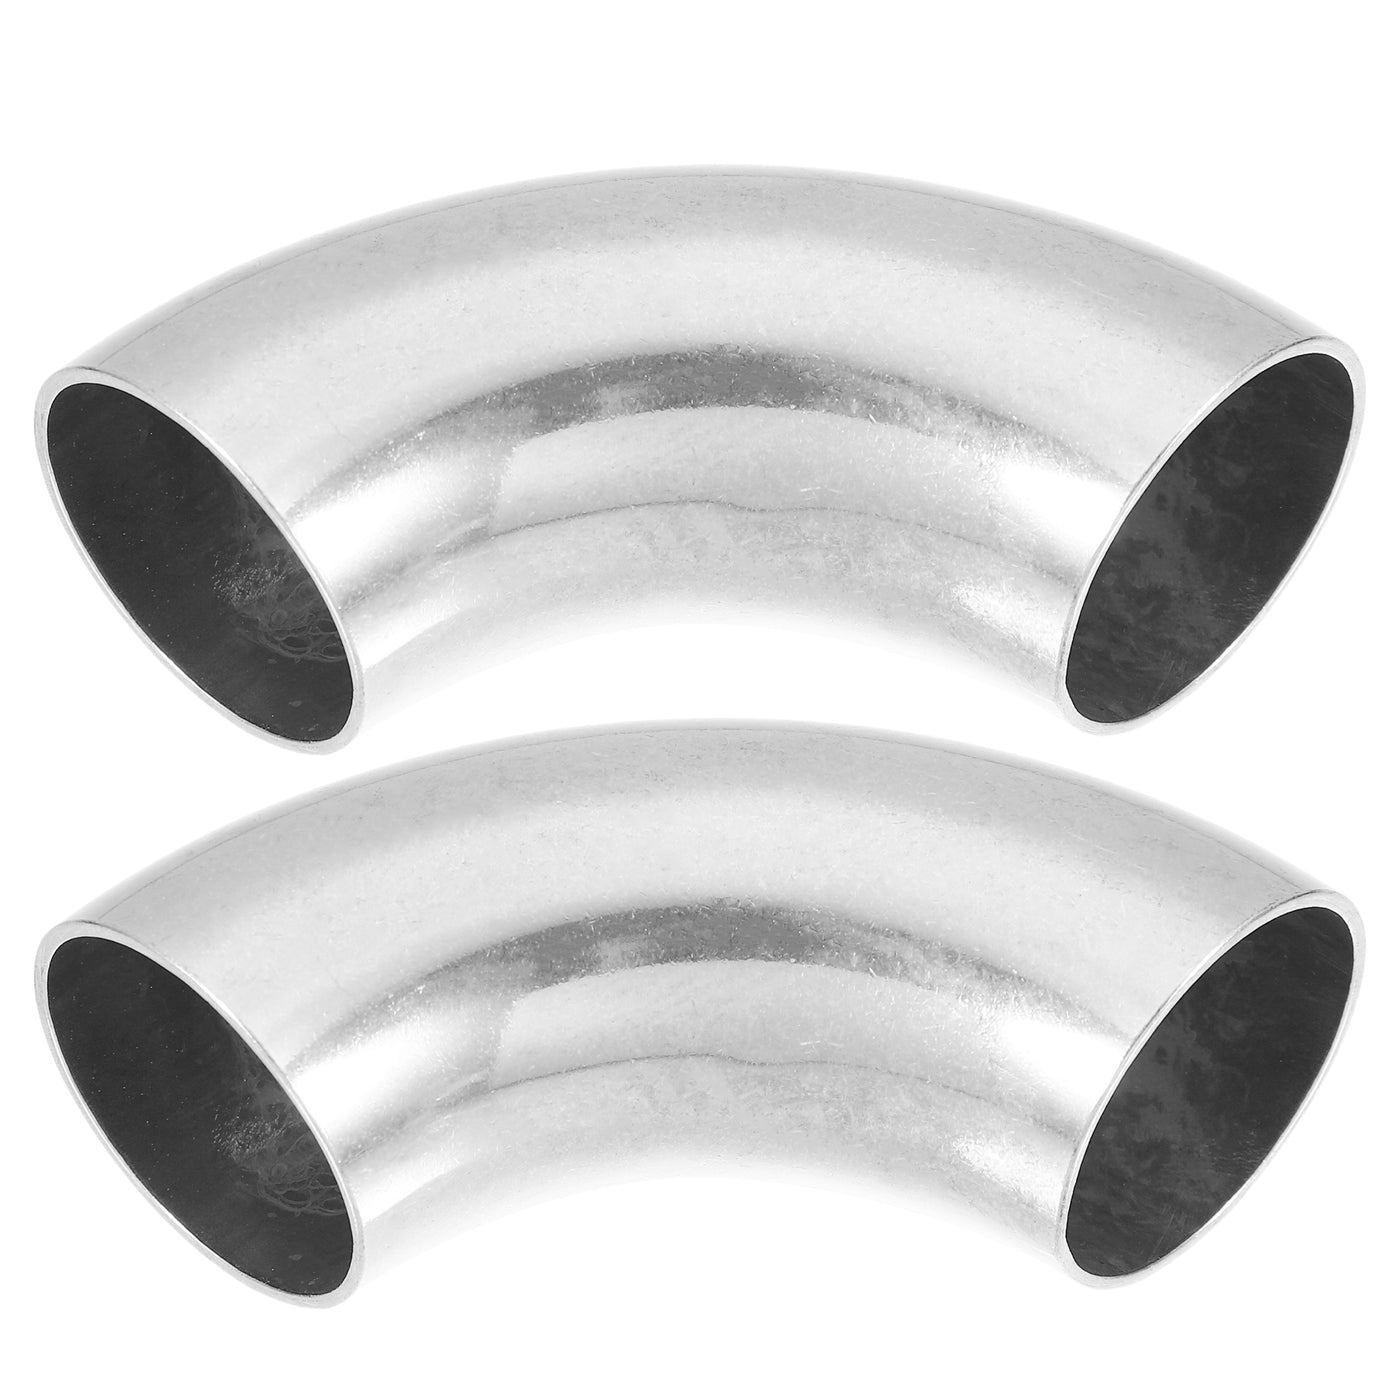 uxcell Uxcell 2pcs 90 Degree SS304 Stainless Steel Bend Tube Exhaust Elbow Pipe for Car Modified Exhaust System 3.94" Arc Length Piping Silver Tone